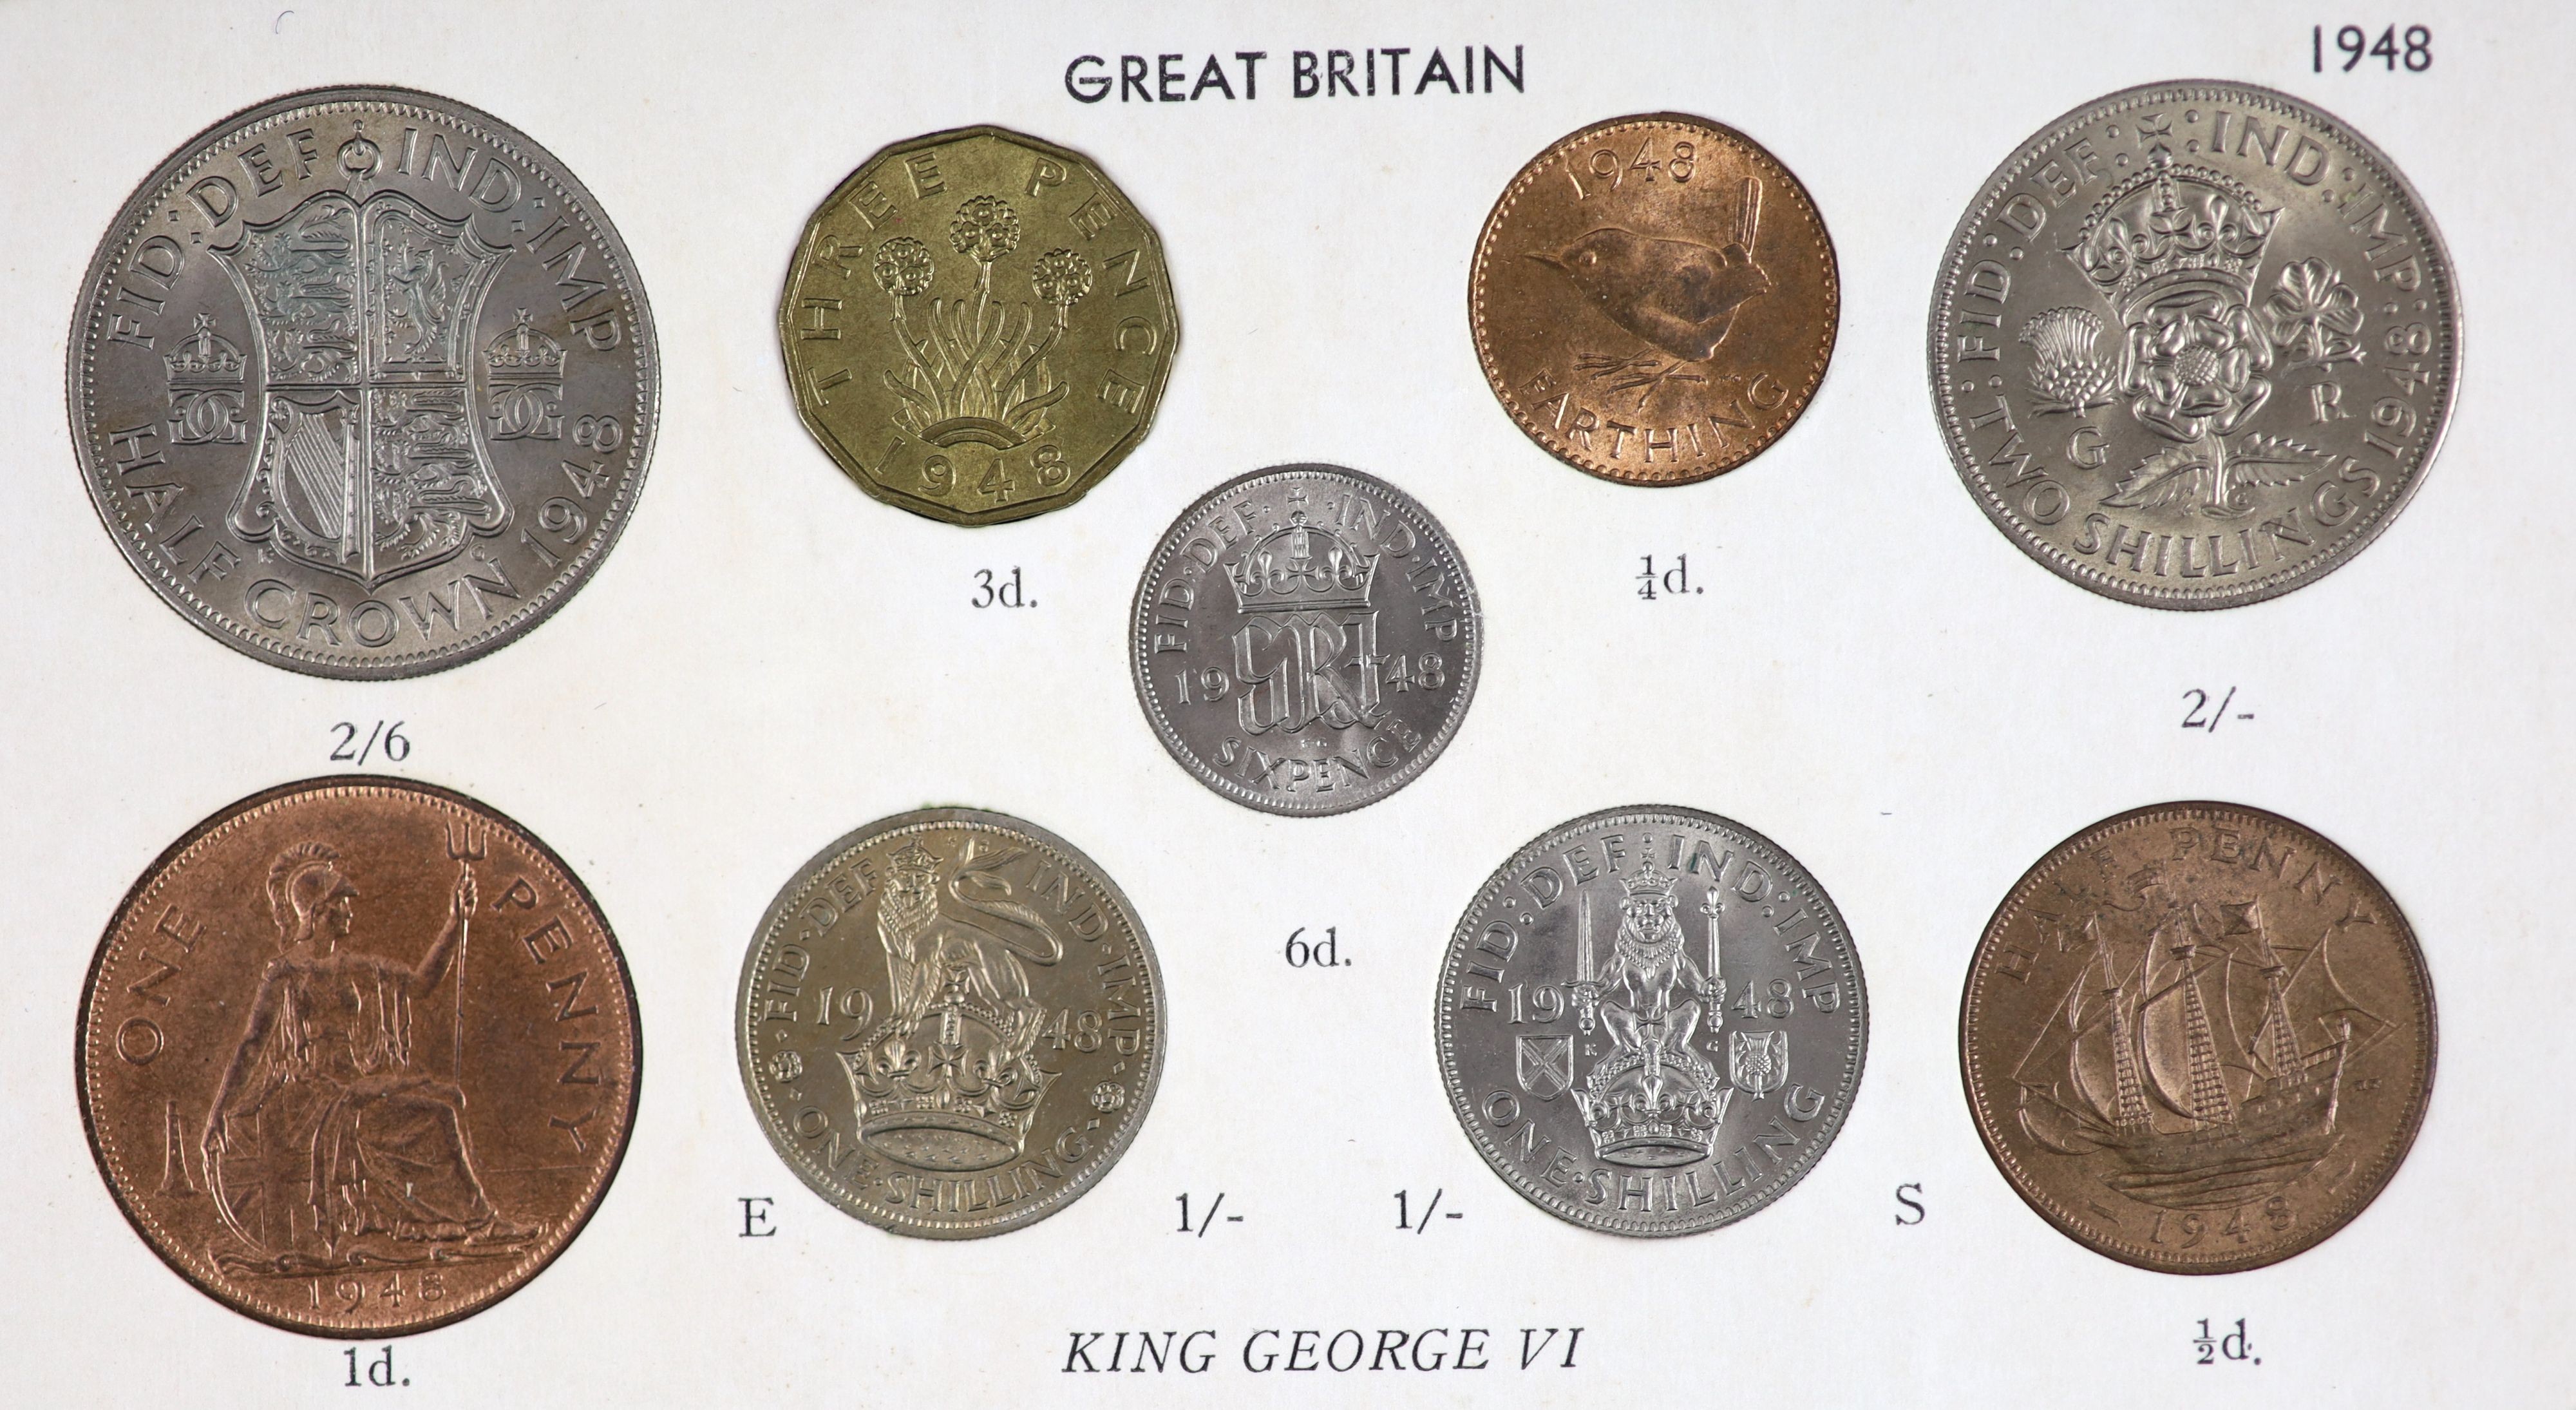 George VI specimen coin sets for 1947 and 1948, first issue, including 1948 brass threepence (S4112), good EF